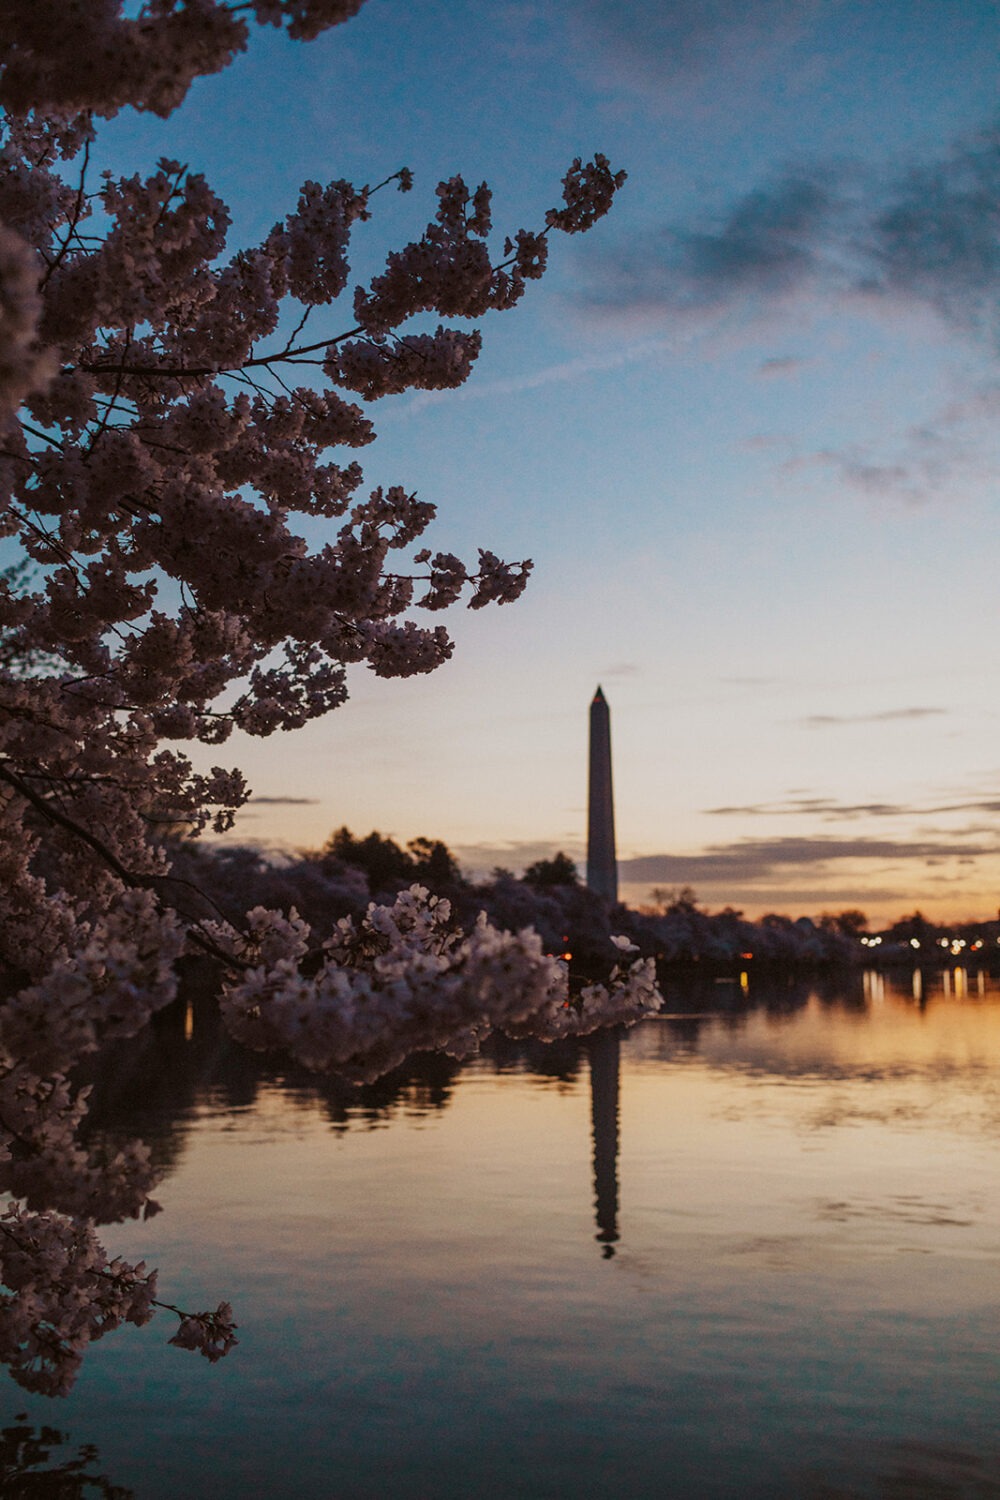 sunrise with cherry blossoms at the National Mall